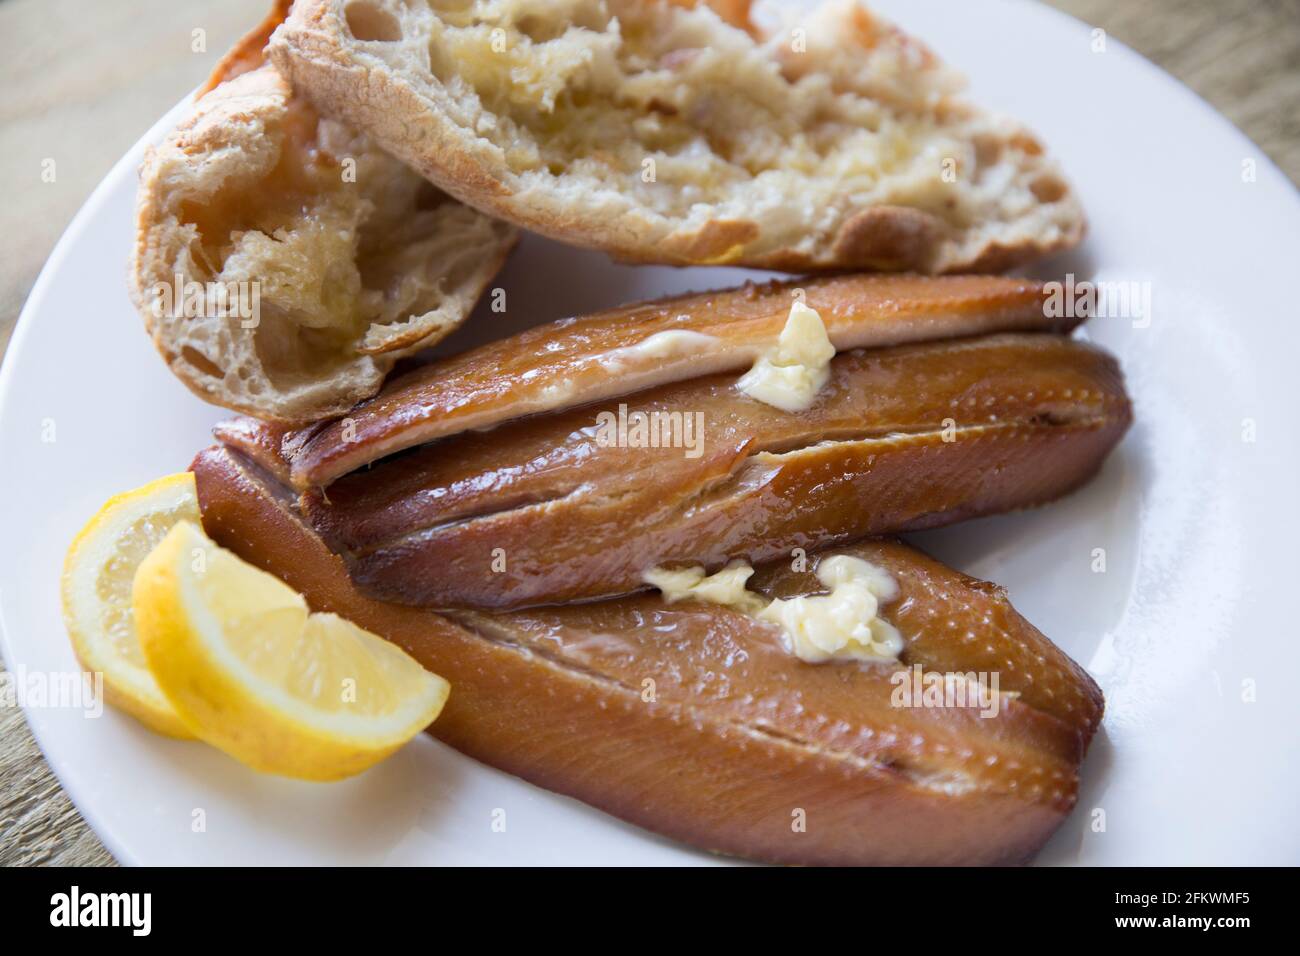 Smoked Craster kipper cutlets presented on a wooden background. Kippers are smoked herrings and are rich in fish oils. Served with warm bread, butter Stock Photo